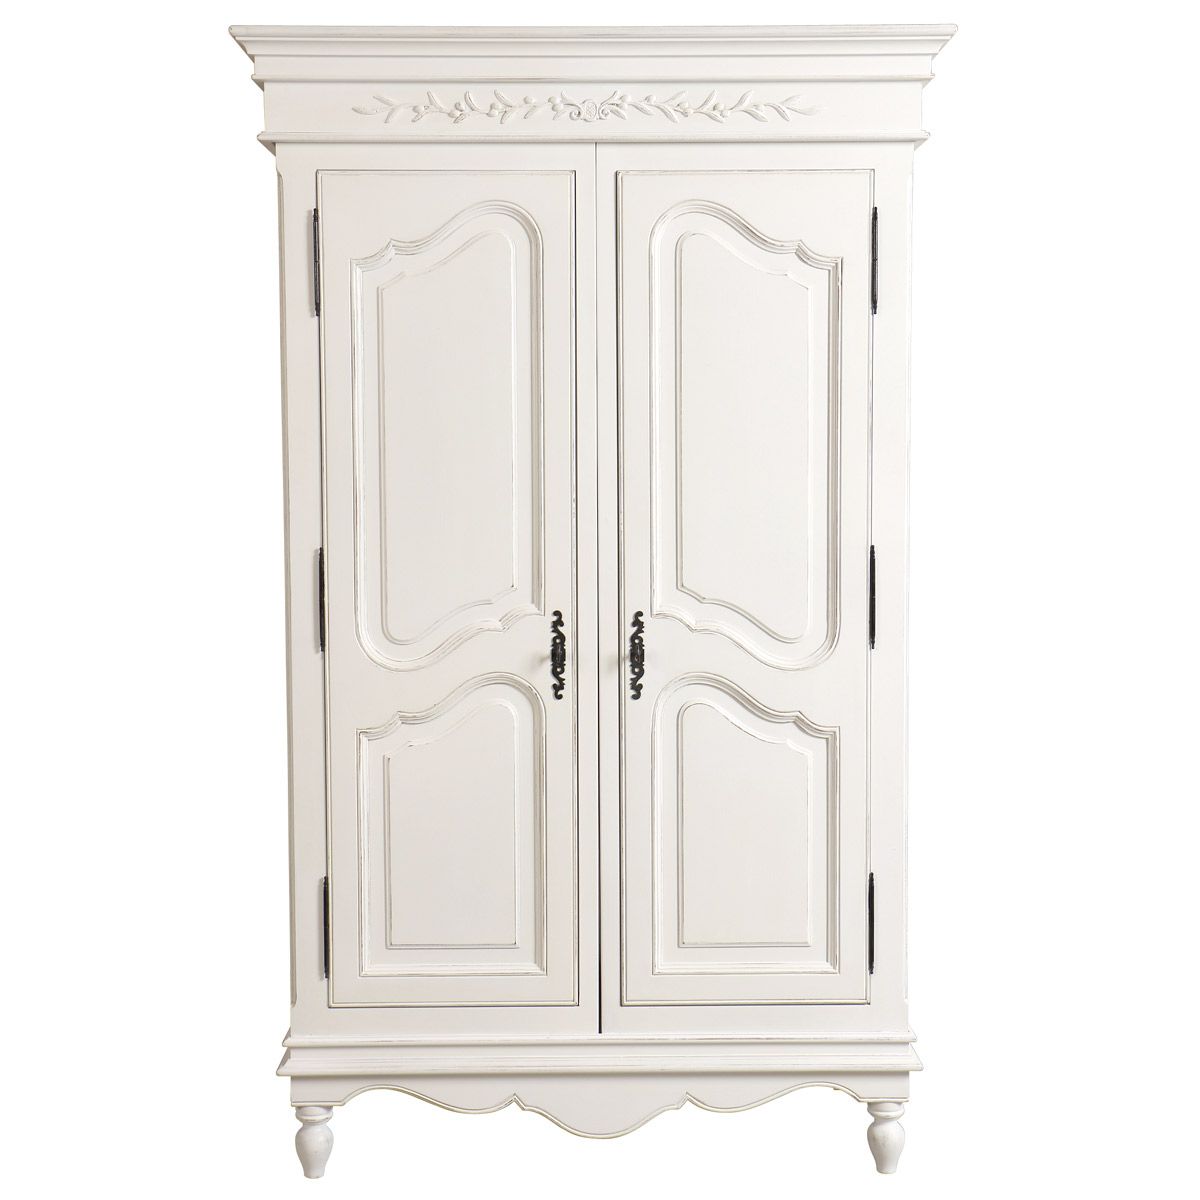 French Armoire Wardrobe – Romance – Low Cost Delivery, Nationwide Within French Armoire Wardrobes (Photo 3 of 15)